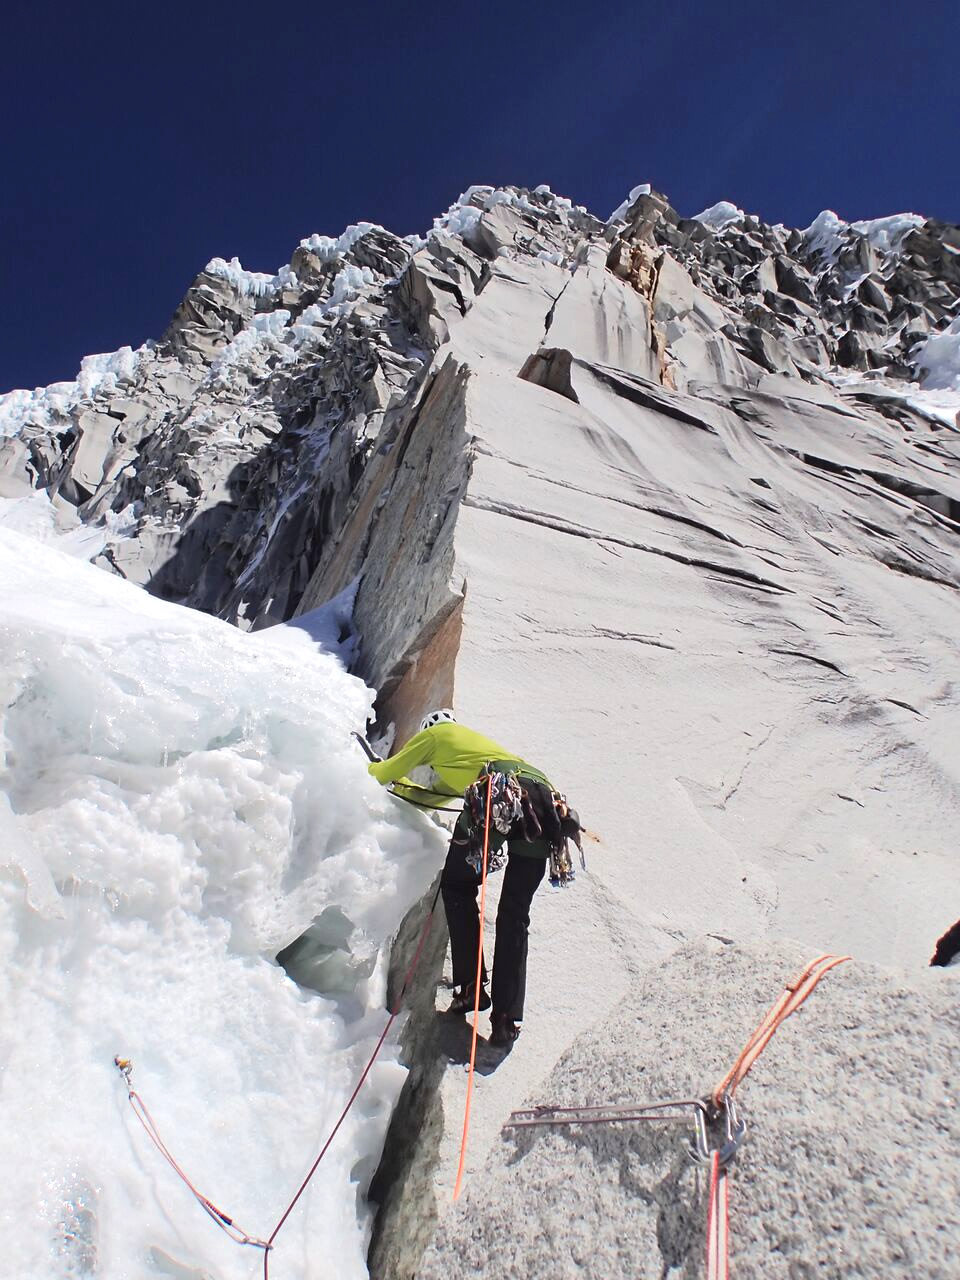 Steve Skelton leading across perfect alpine terrain on the East Face Rock Rib. Dropping a pack for this crux pitch, the team climbed 12 pitches of alpine rock to gain the north ridge approximately 300 feet from the summit. [Photo] Ben Dare